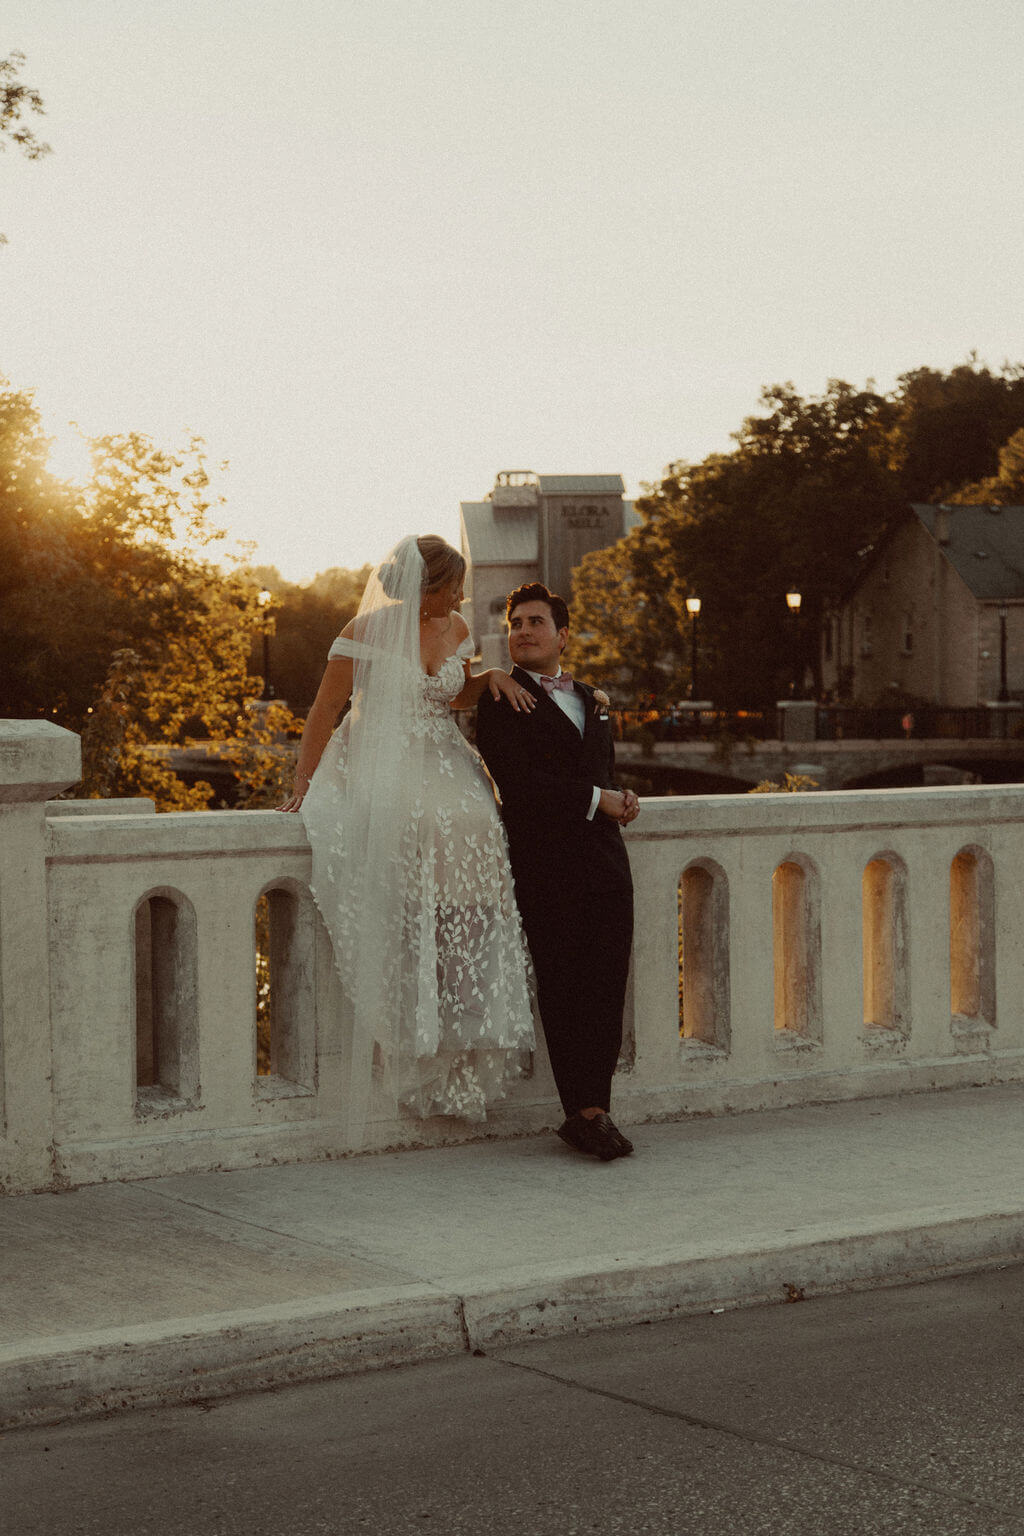 Bride and groom sunset portraits in Elora, Ontario